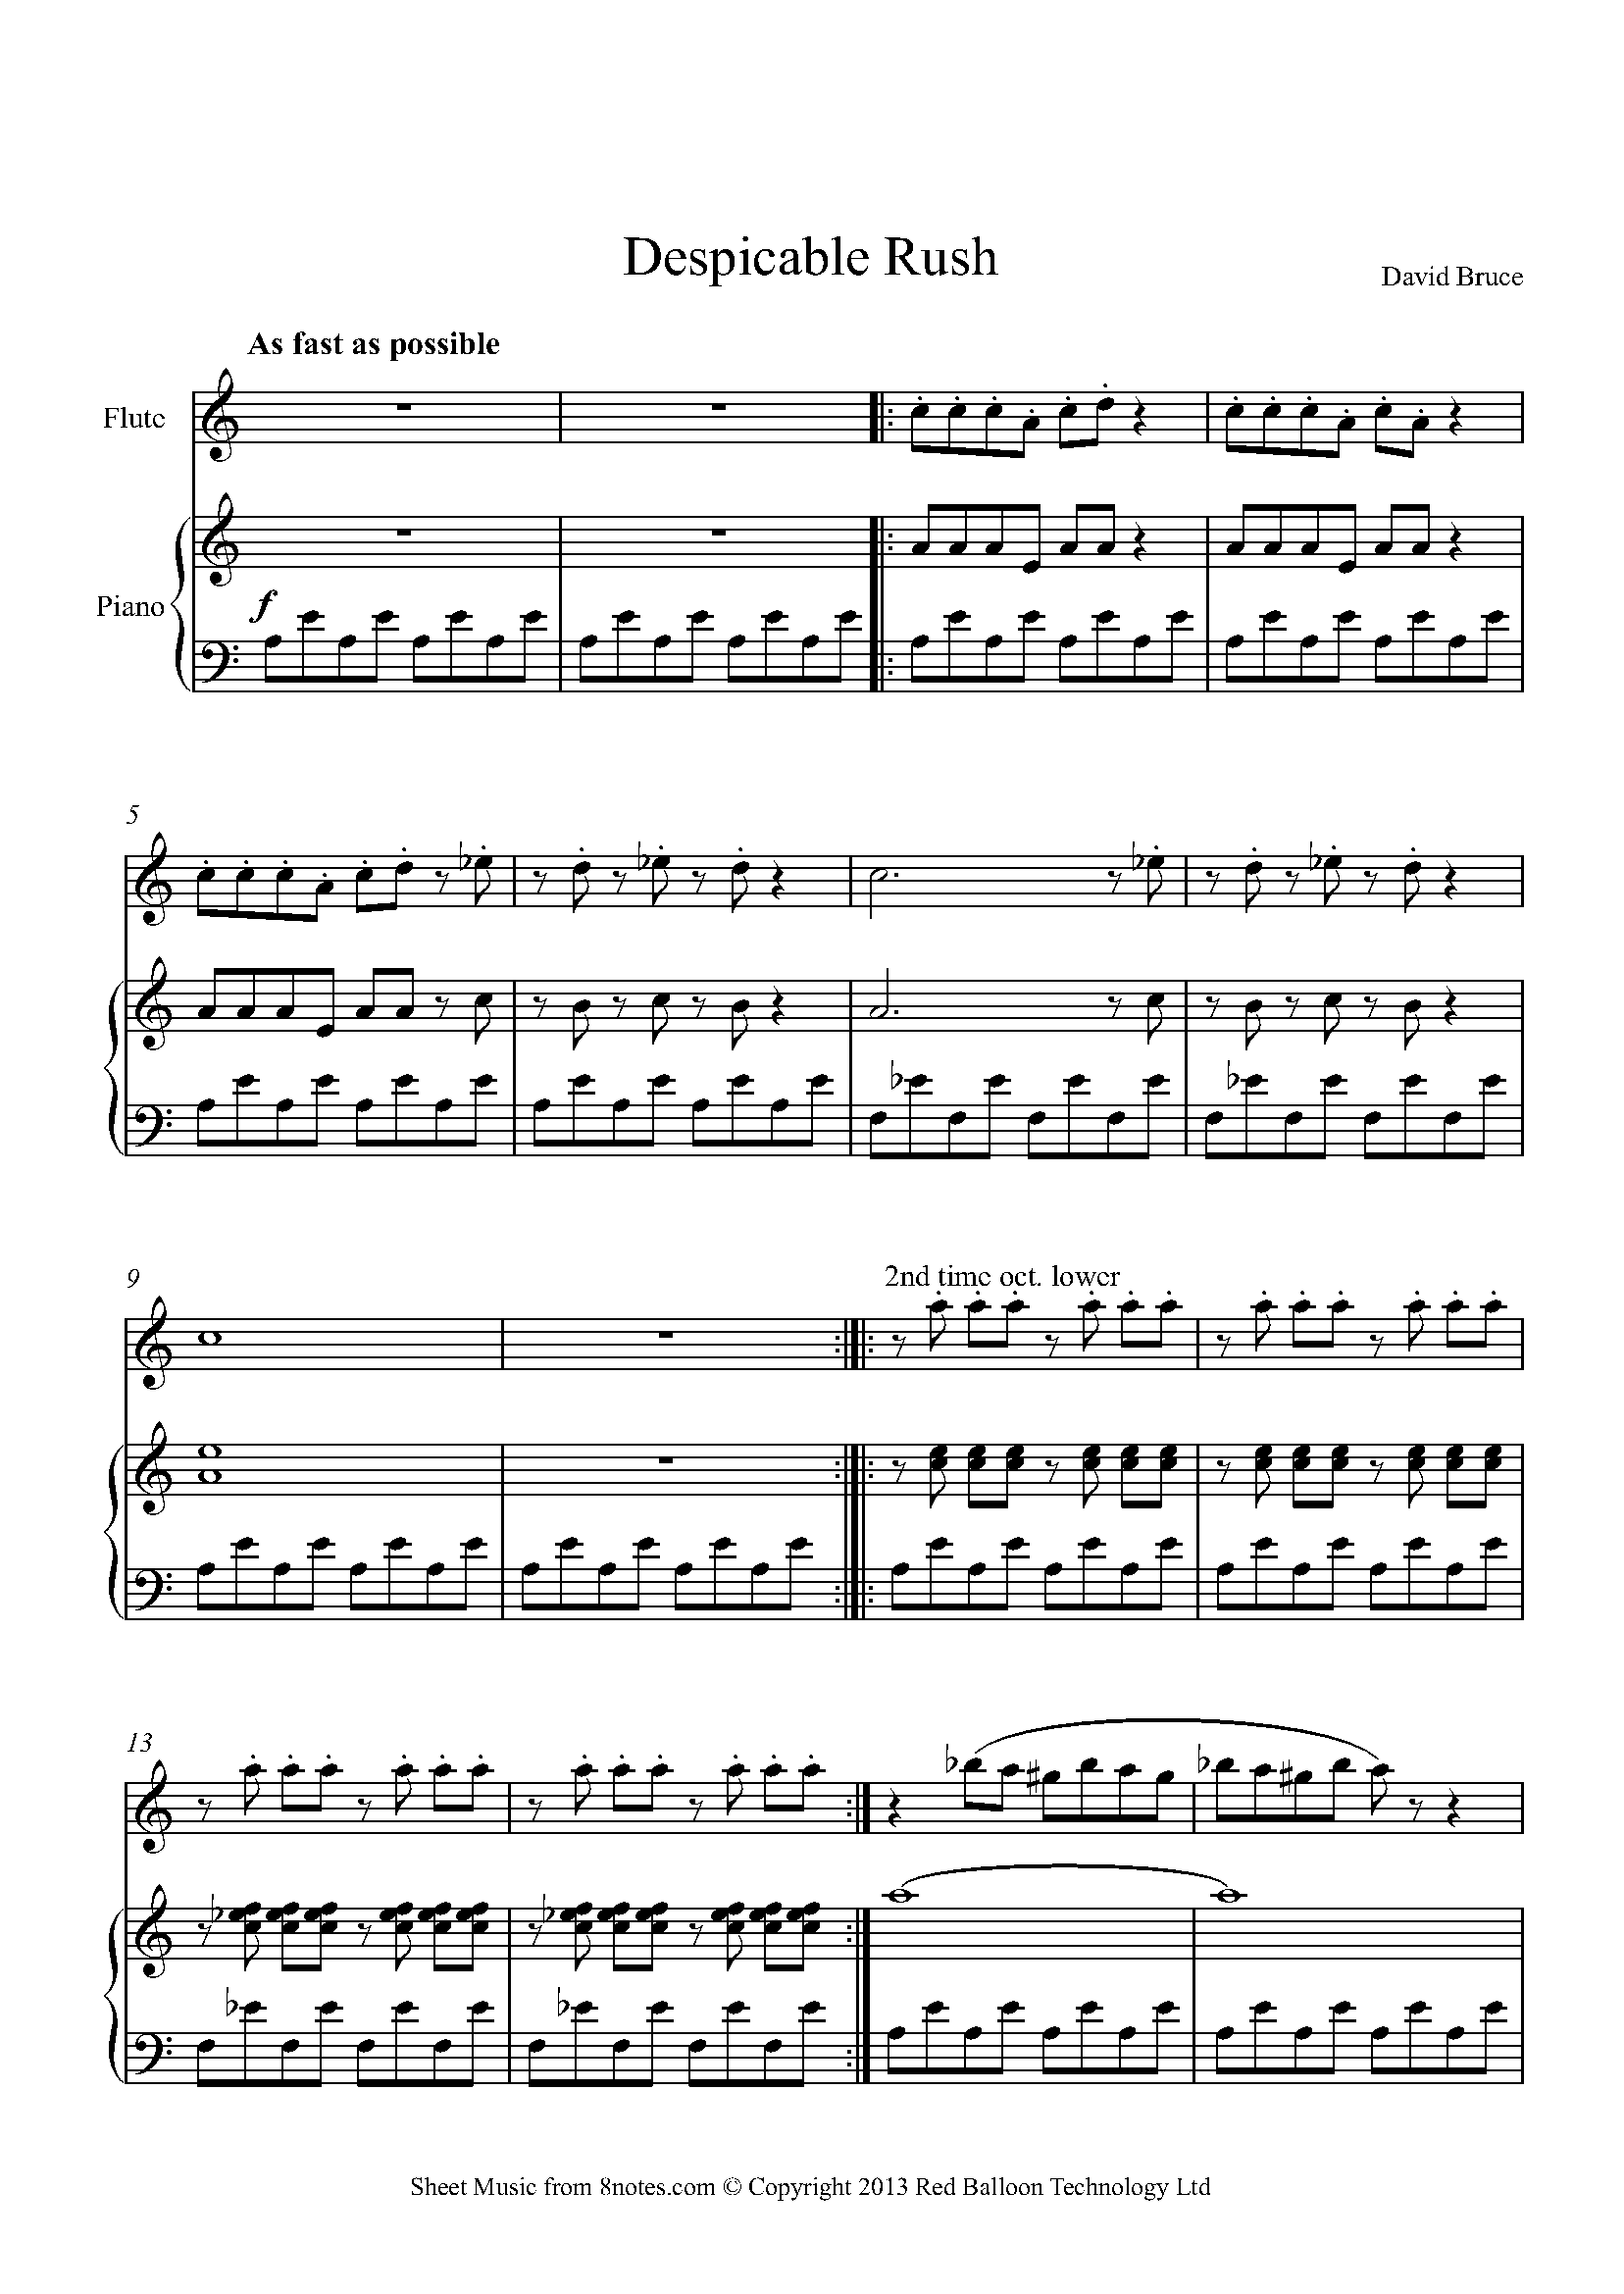 David Bruce - Despicable Rush Sheet music for Flute - 8notes.com